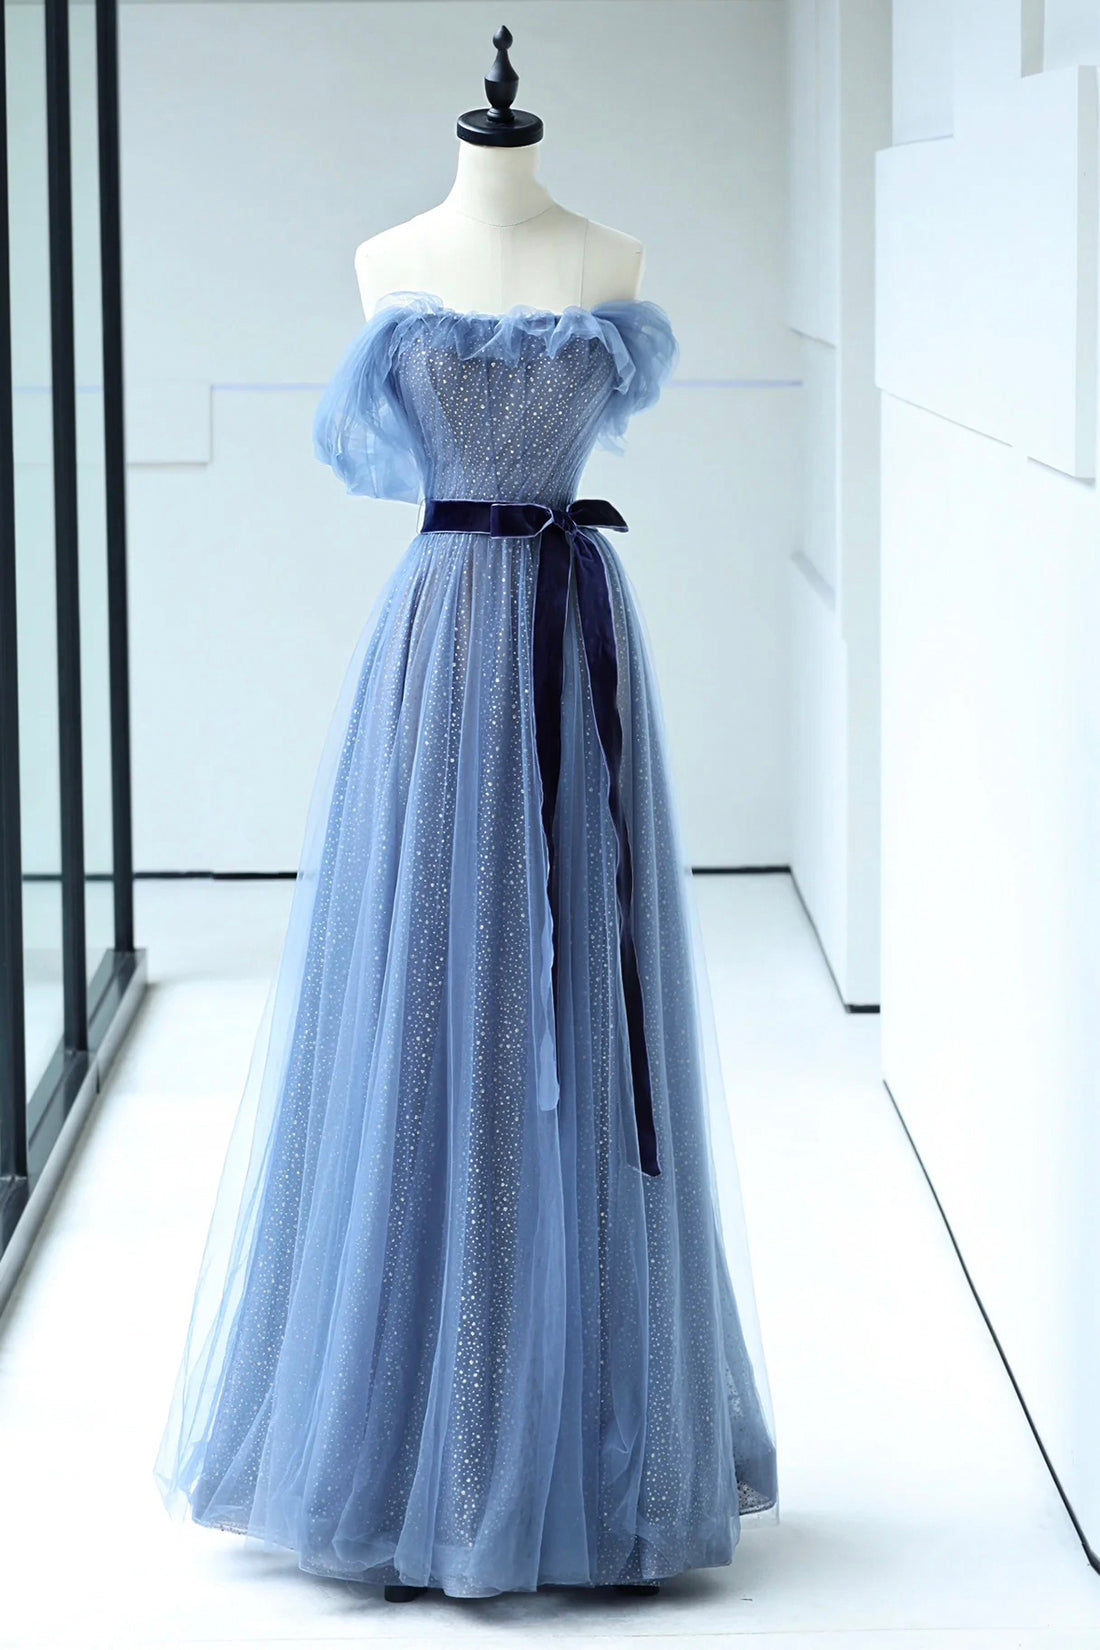 Blue Floor Length Prom Dress Outfits For Girls, A-line Strapless Tulle Evening Dress